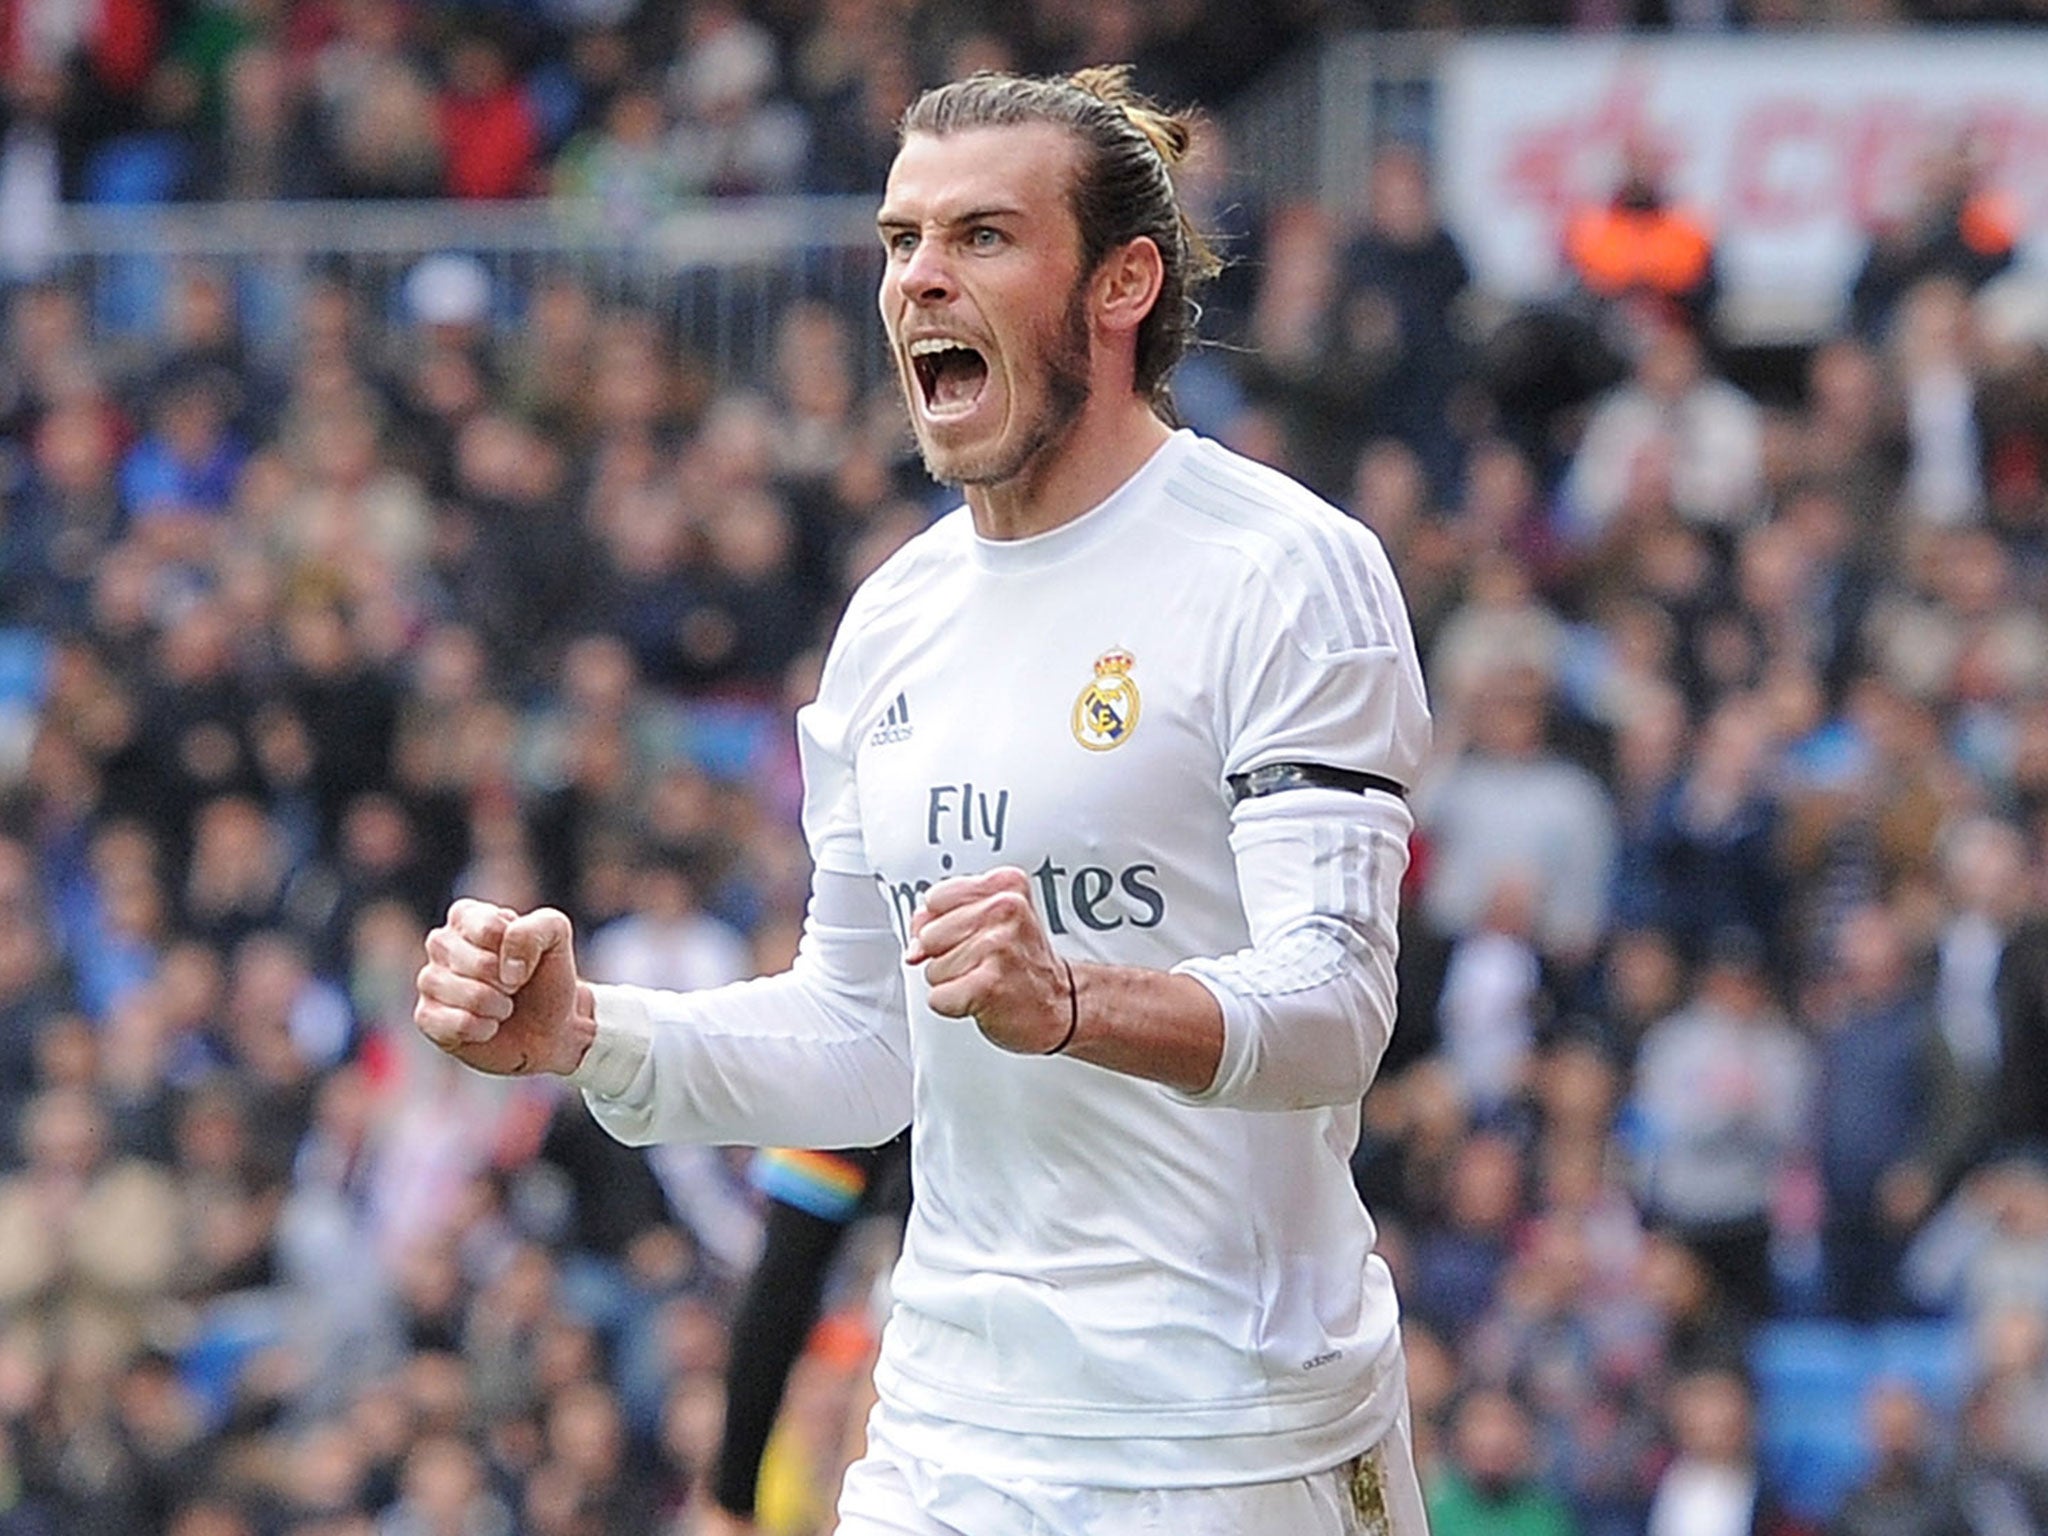 Gareth Bale celebrates one of his four goals for Real Madrid